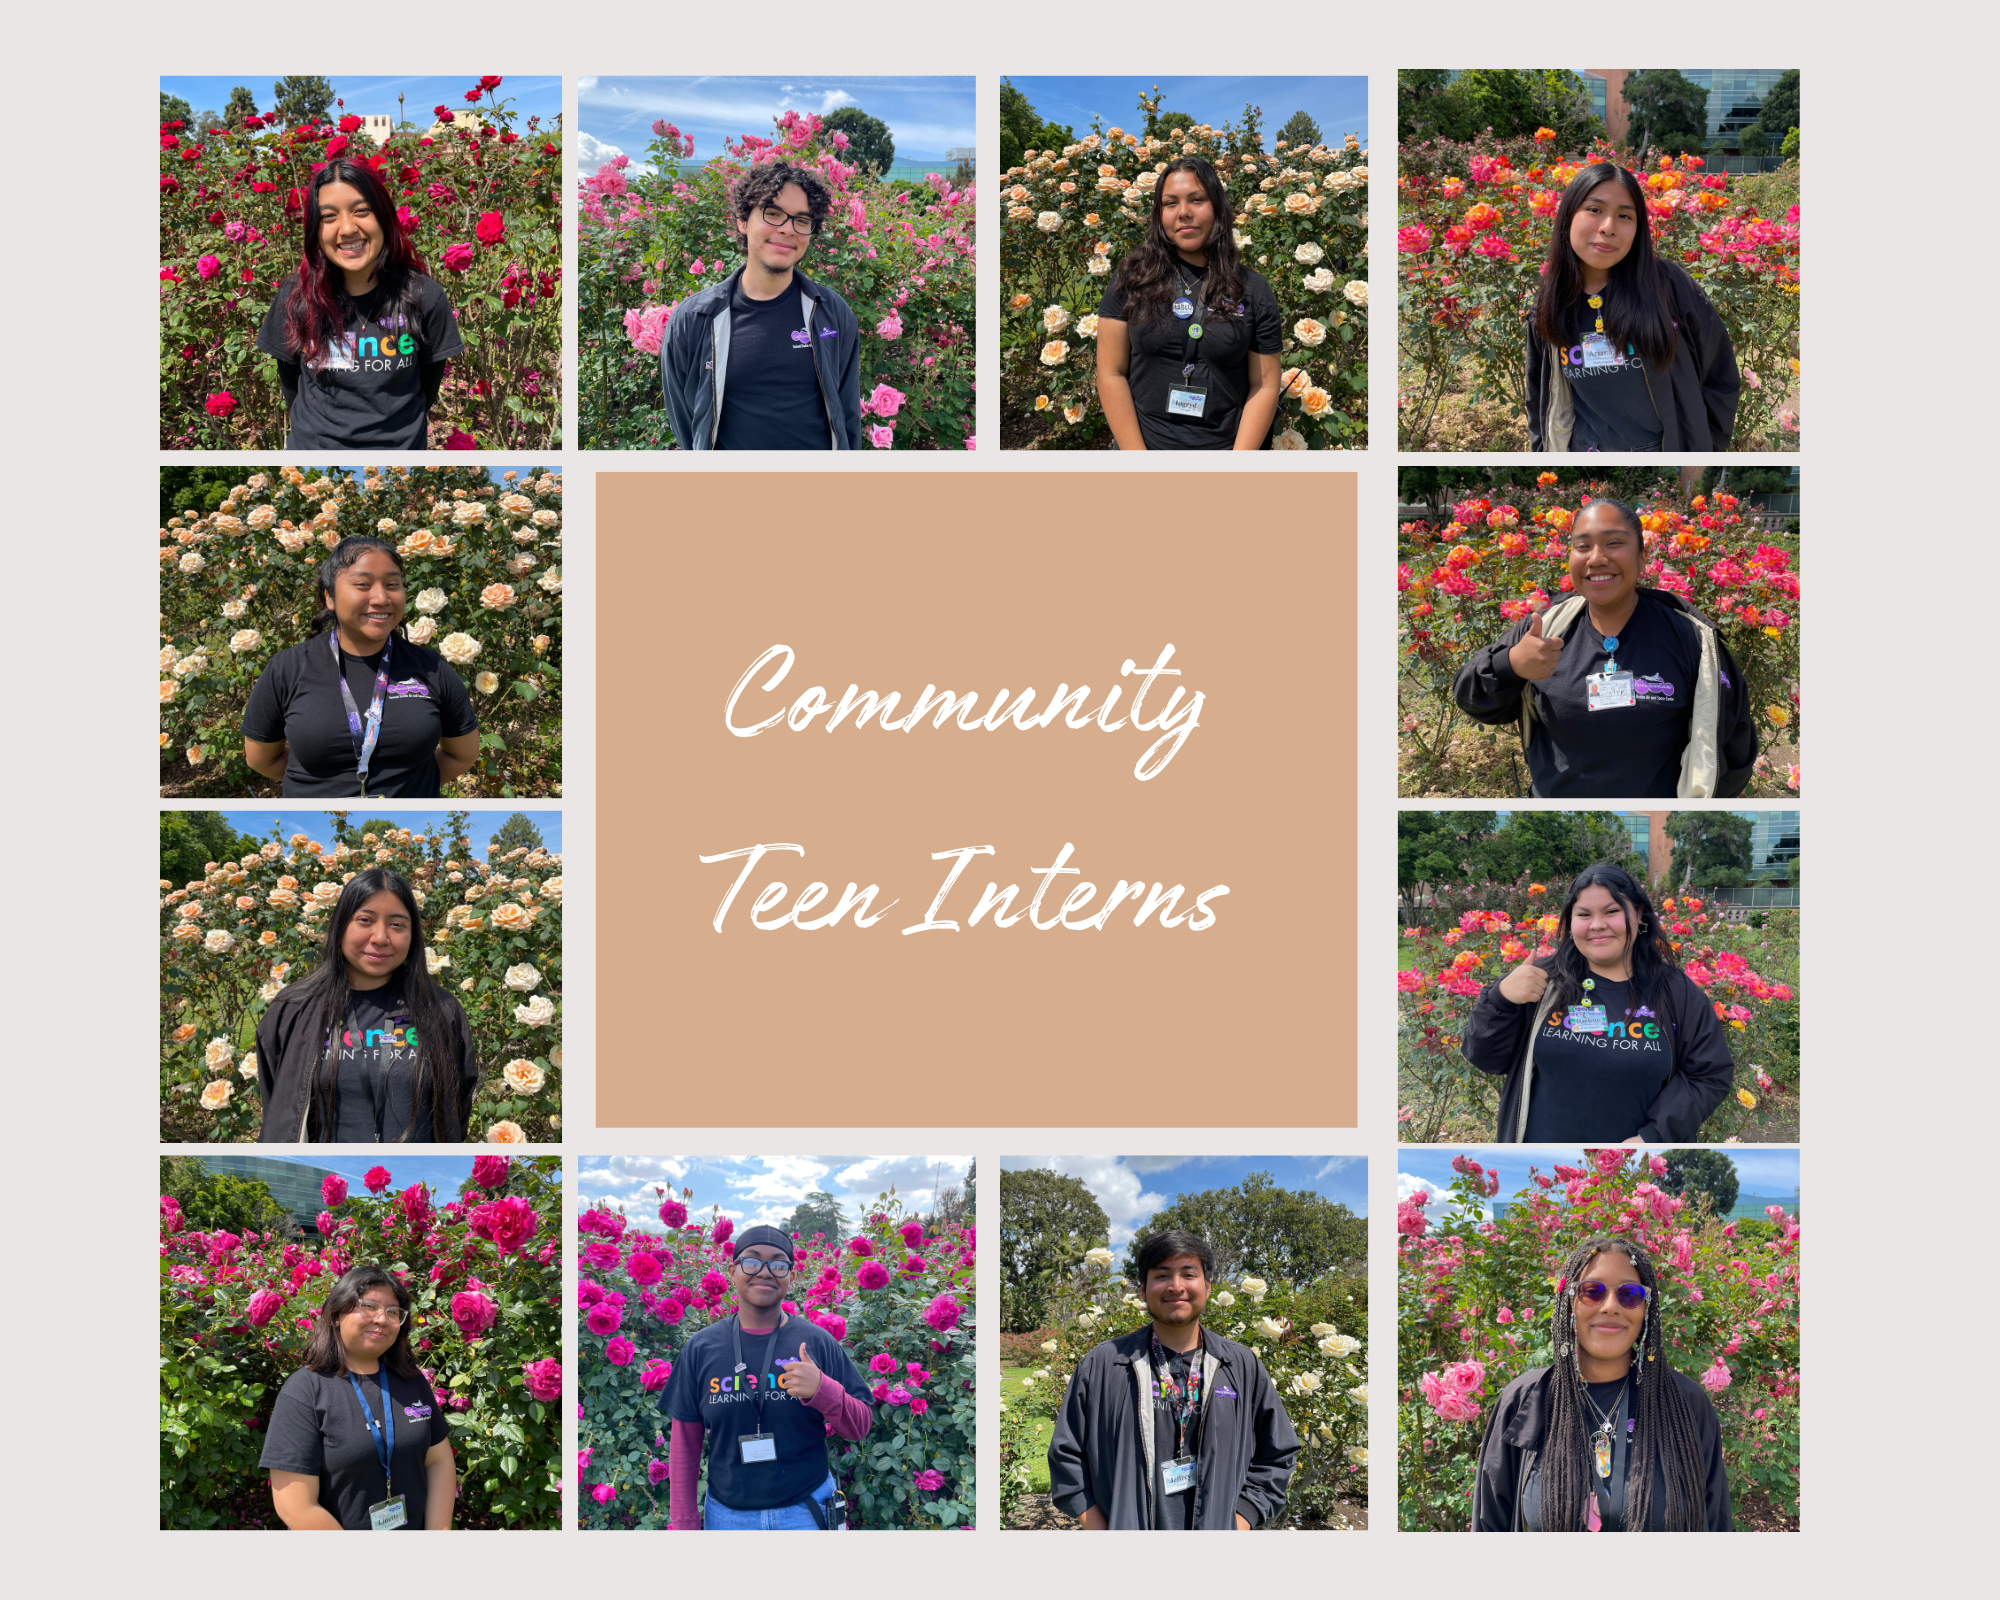 Text "Community Teen Interns" surrounded by collage of intern portraits